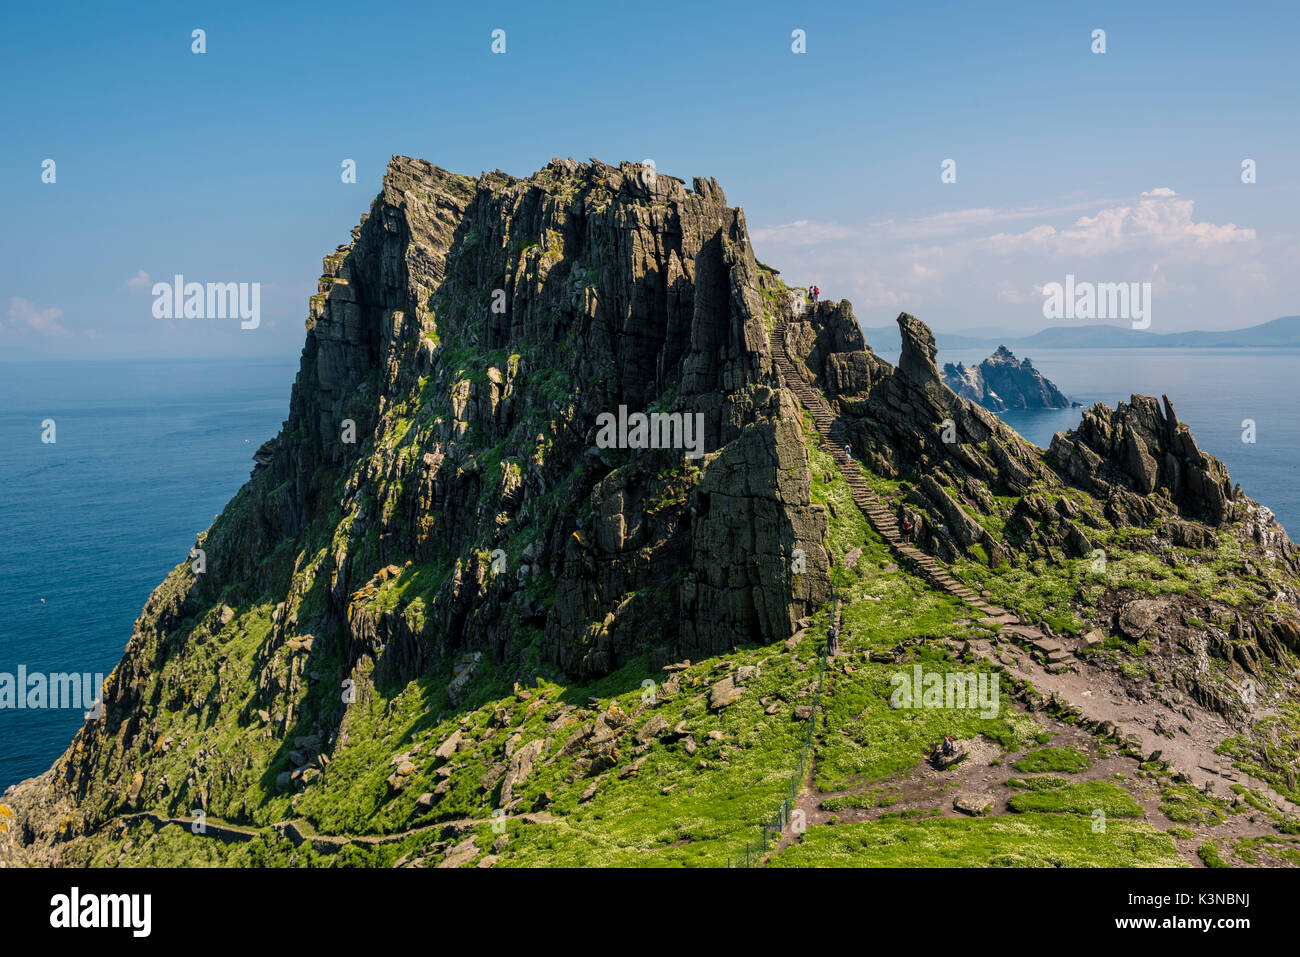 Skellig Michael (Great Skellig), Skellig islands, County Kerry, Munster province, Ireland, Europe. The stone stairs leading to the monastery on top of the island. Stock Photo